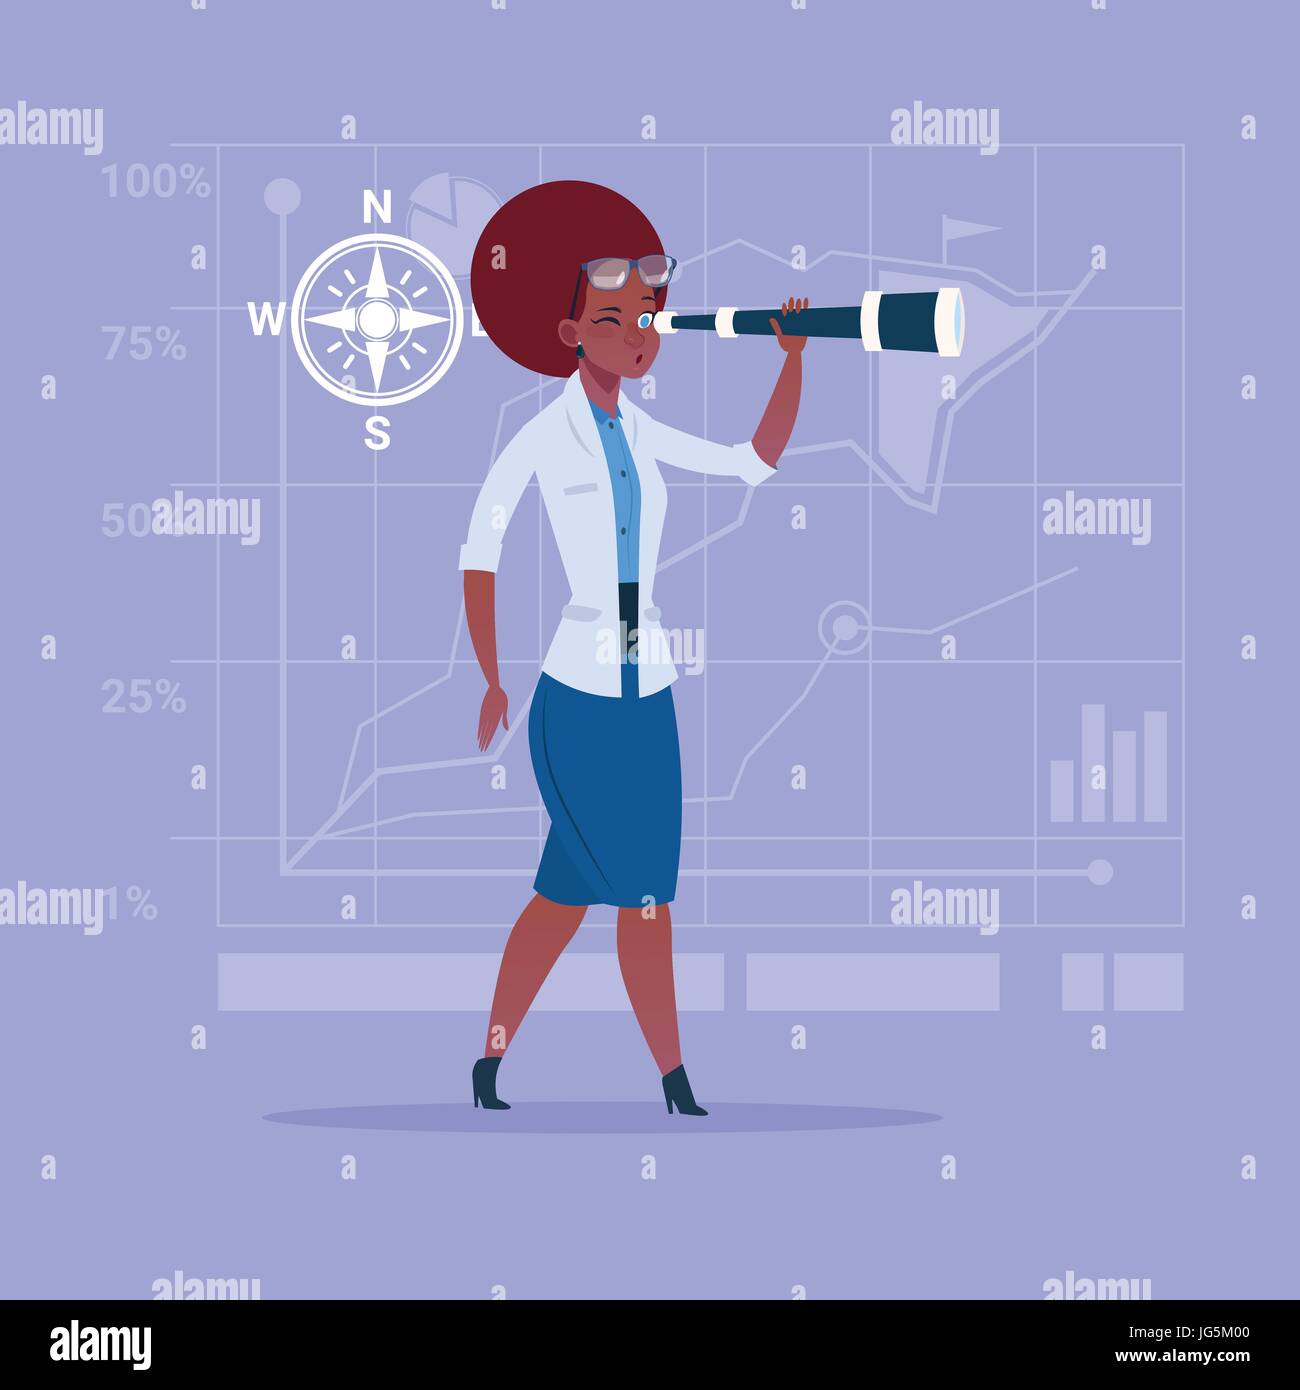 African American Business Woman With Binoculars Successful Future Career Concept Stock Vector